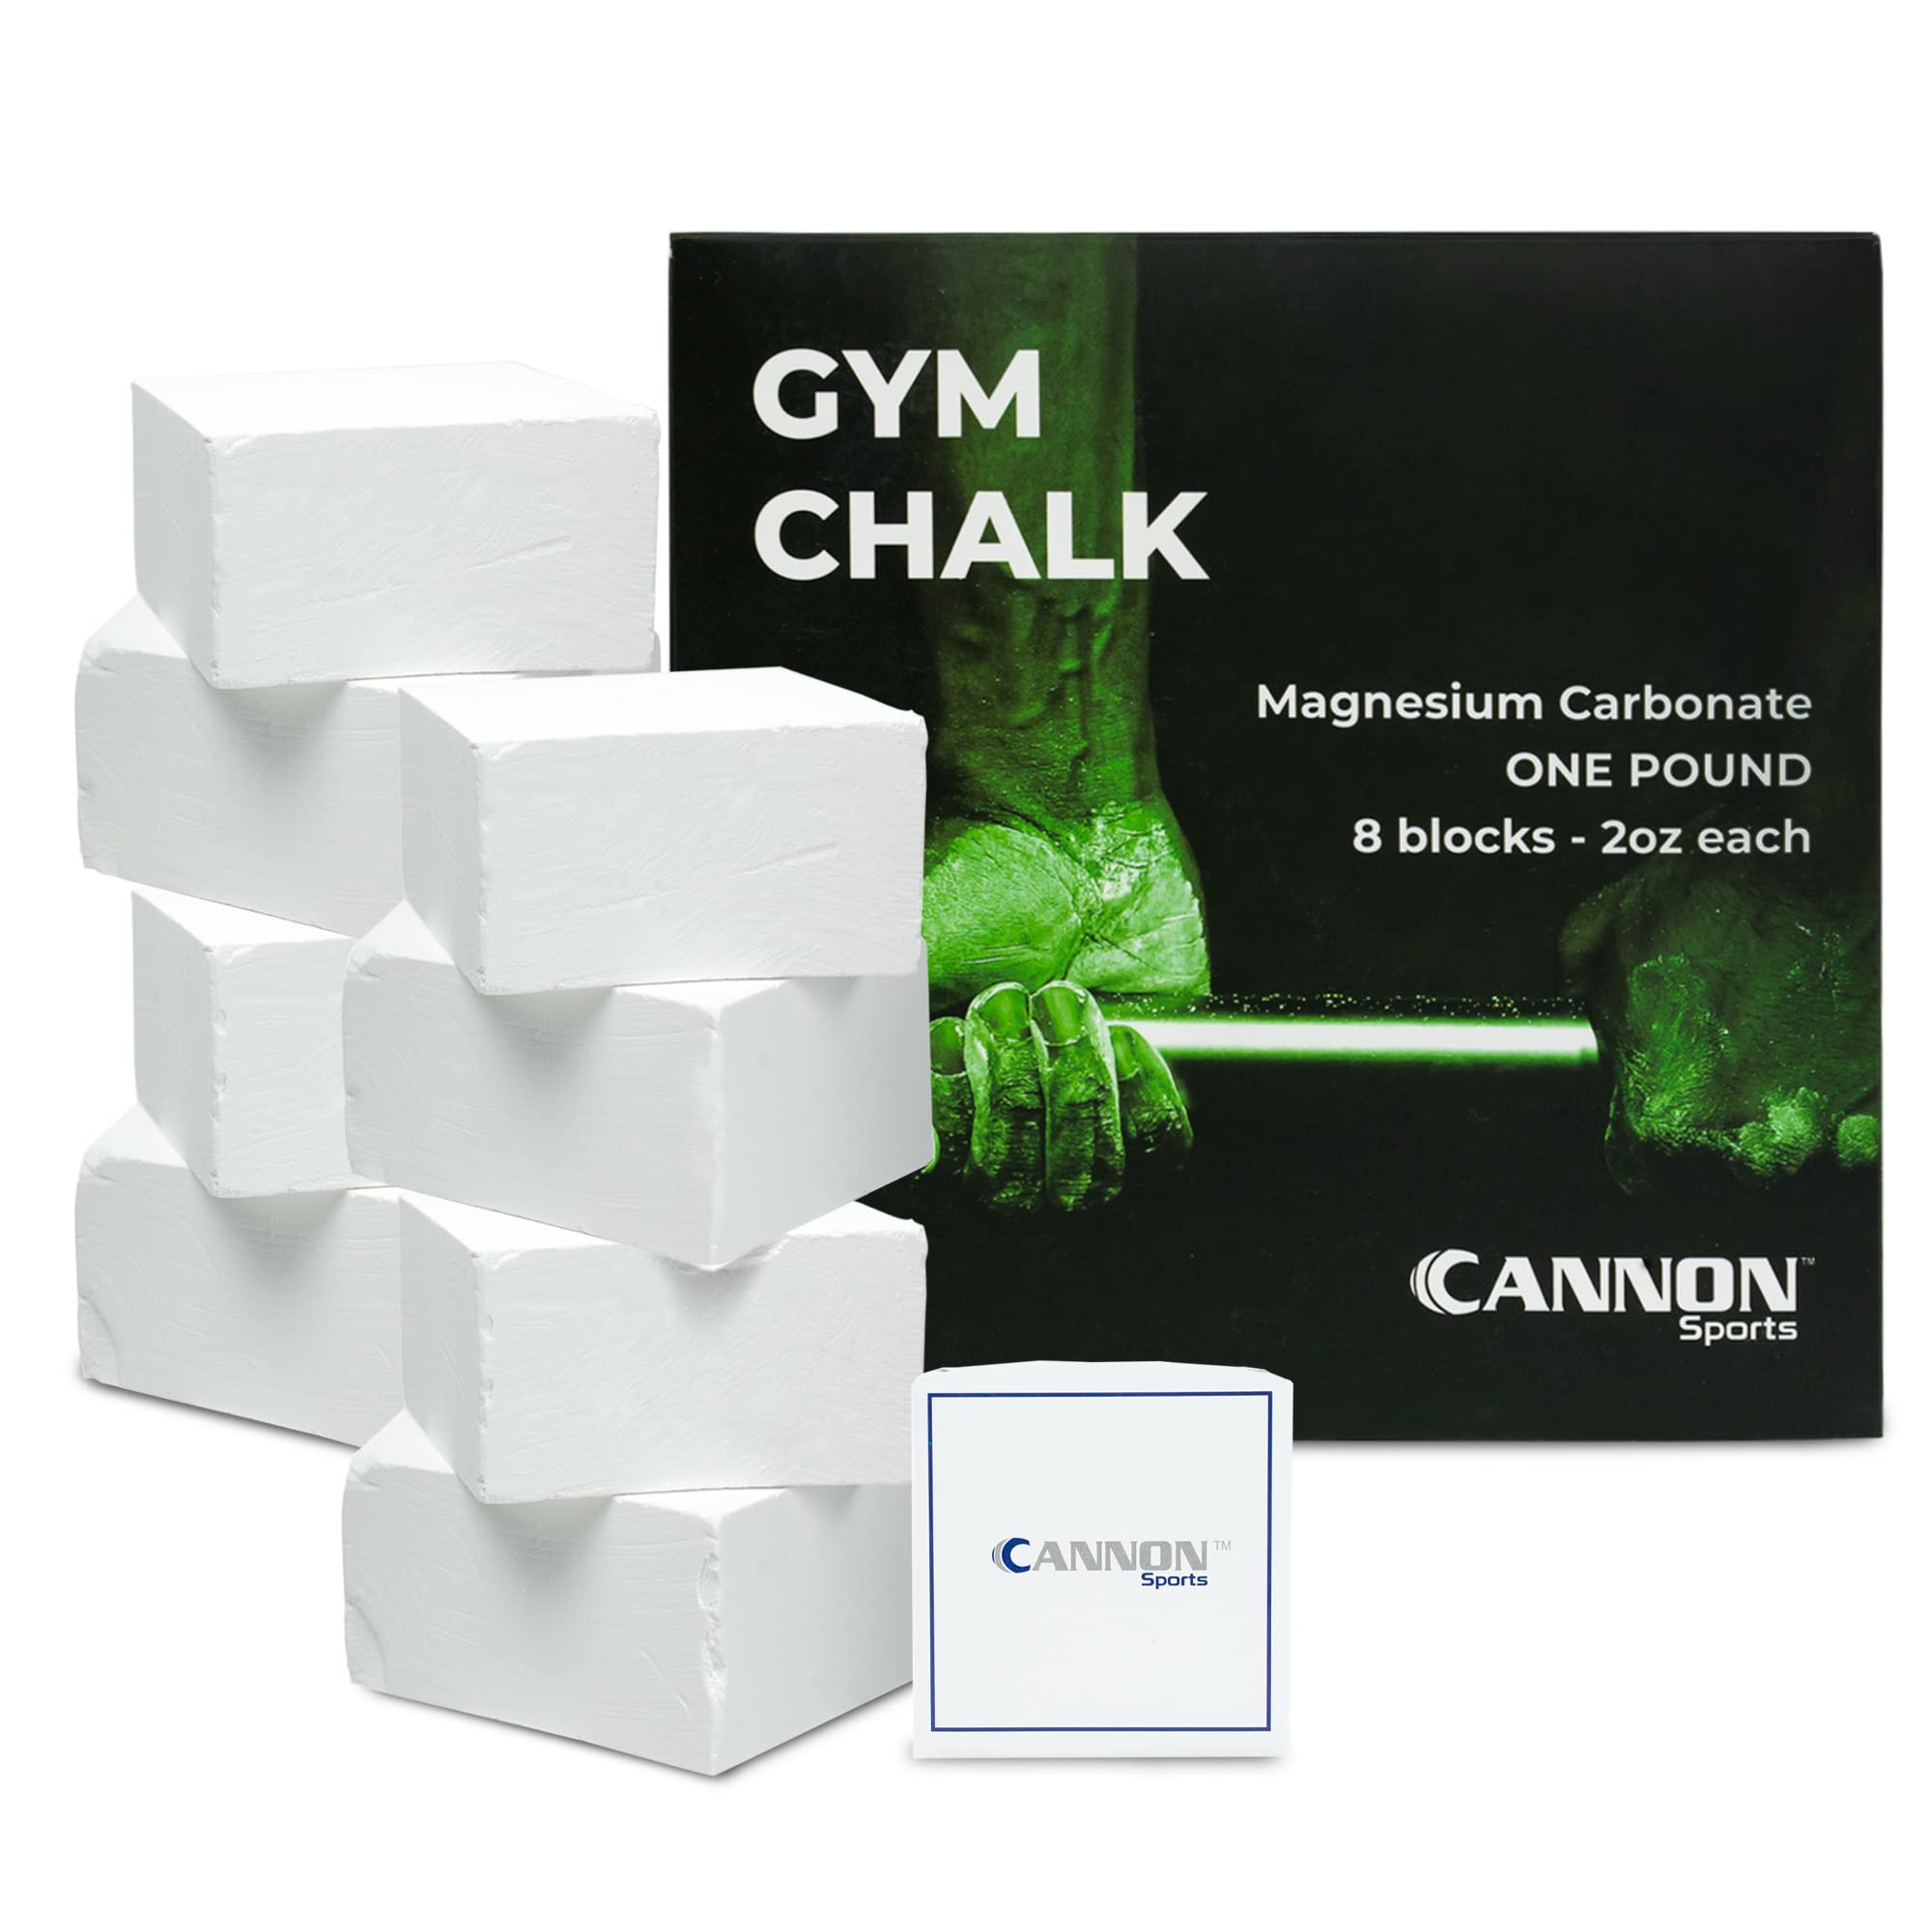 Cannon Sports White Gym Chalk for Athletes, Magnesium Carbonate for  Weightlifting, Gymnastics & Rock Climbing Chalk Blocks (8 - 2oz)